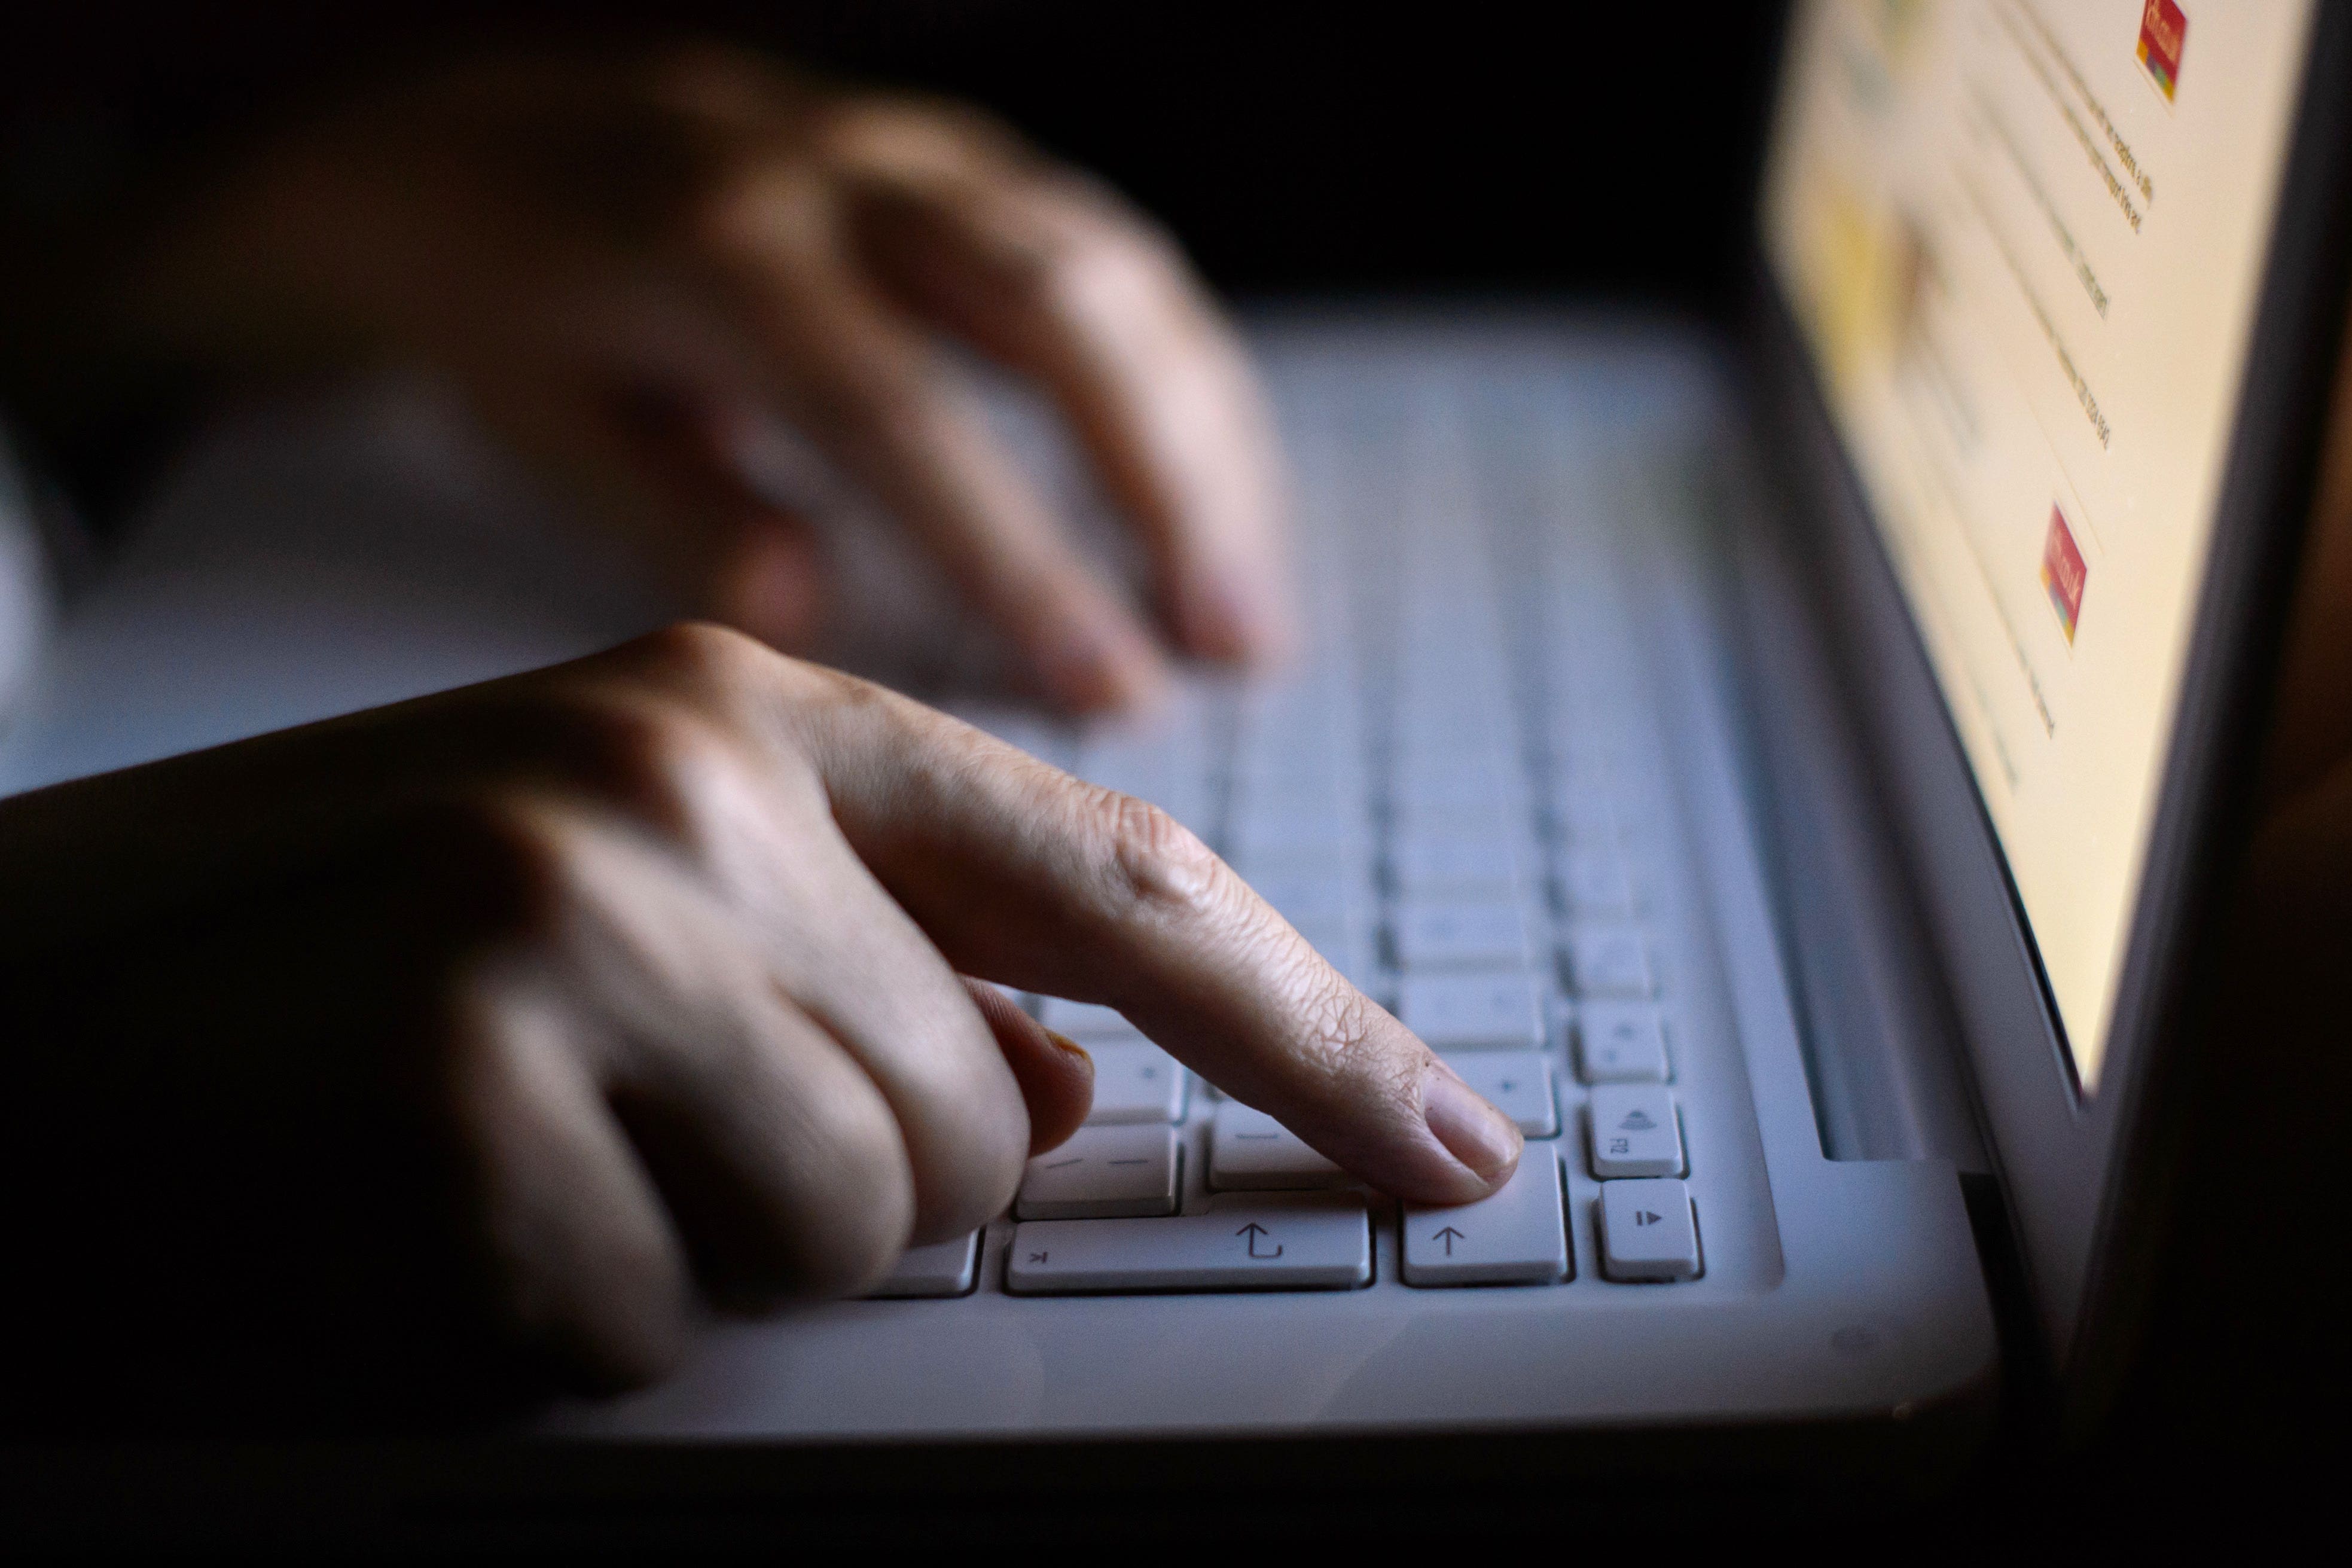 The data leak is the latest in a series of breaches by police forces